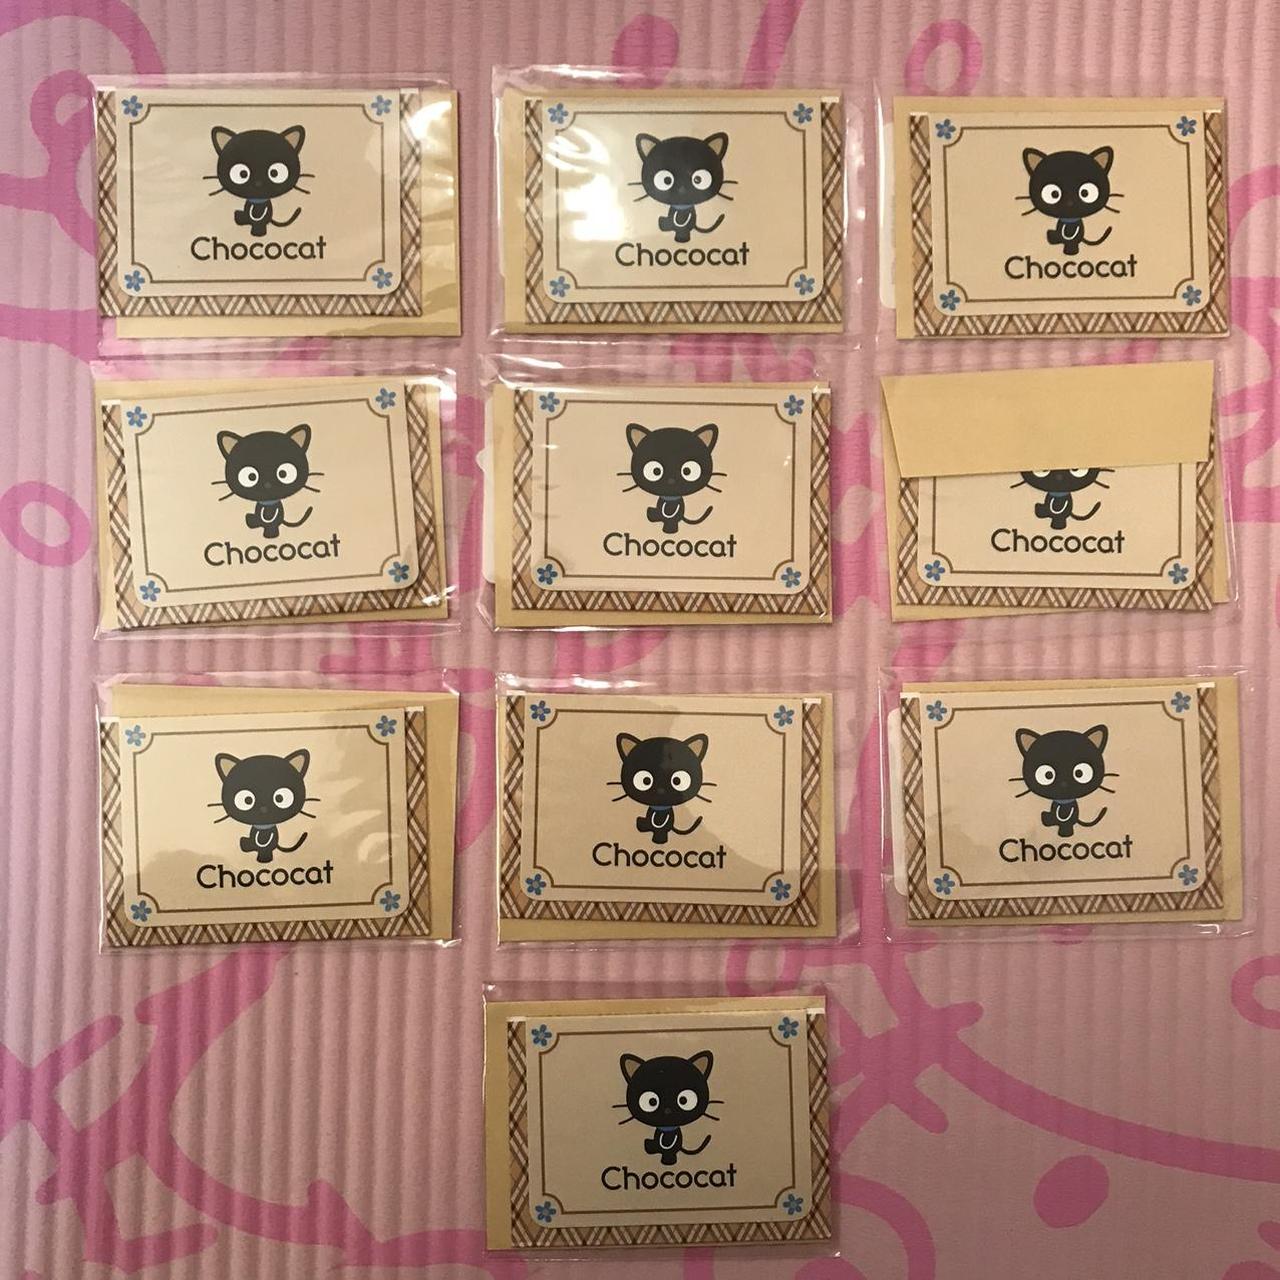 This is a set of 10 chococat invitation cards which - Depop